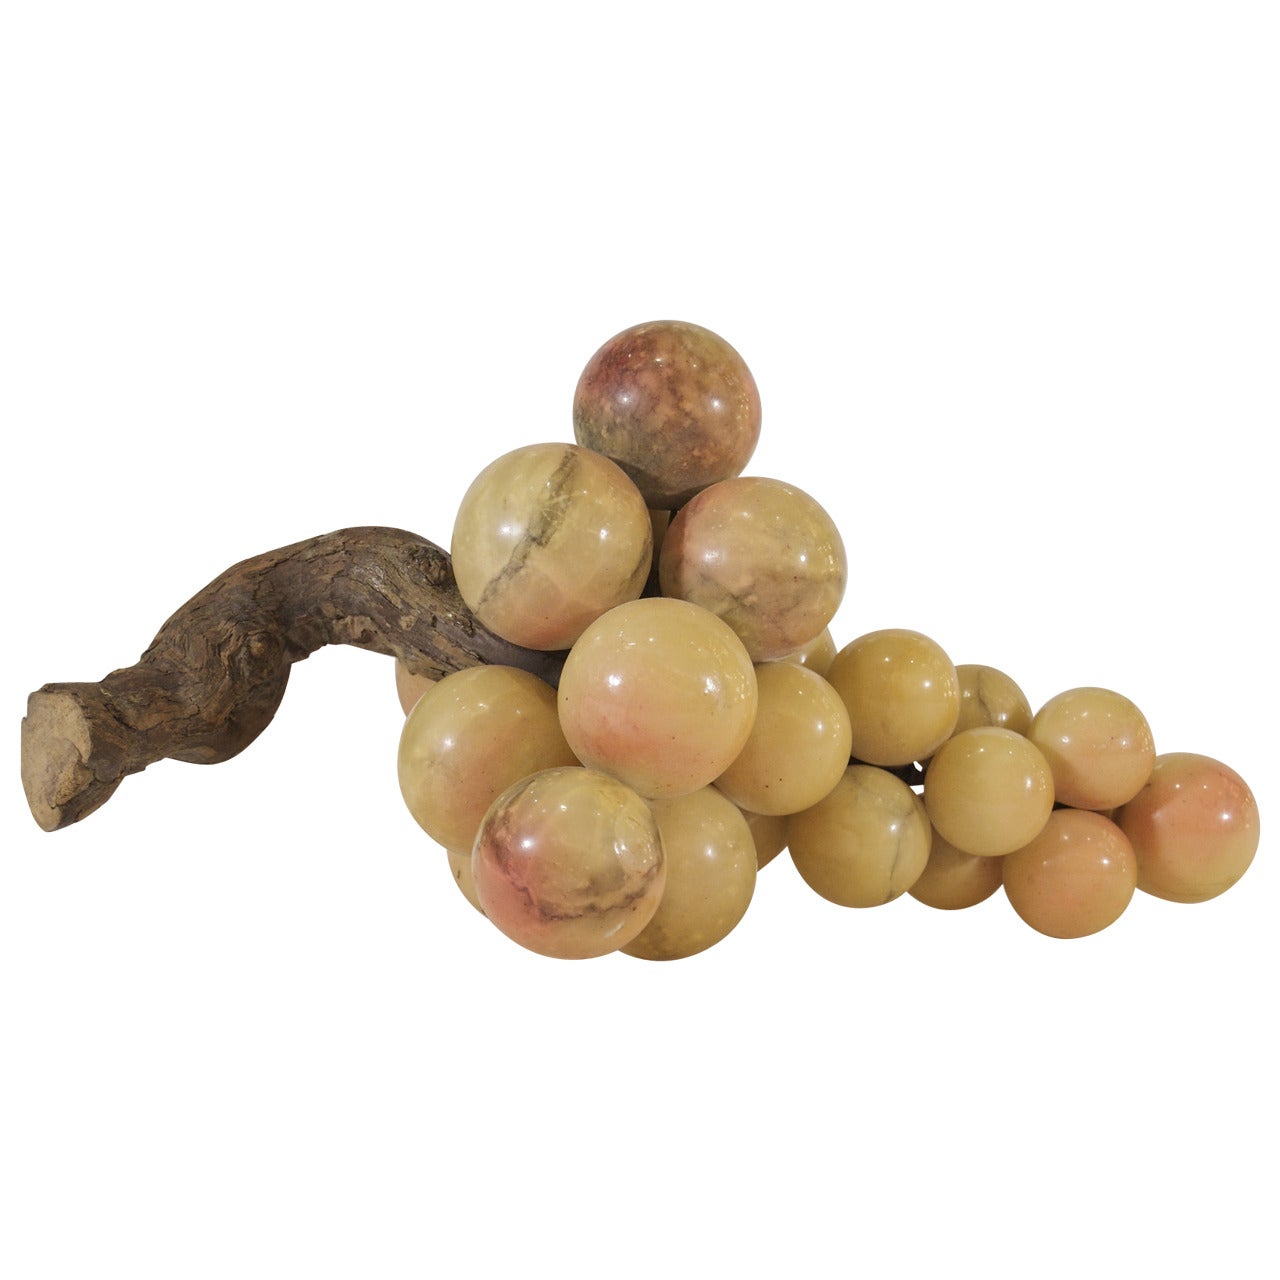 Well-Formed Stone Grapes with Wood Stem